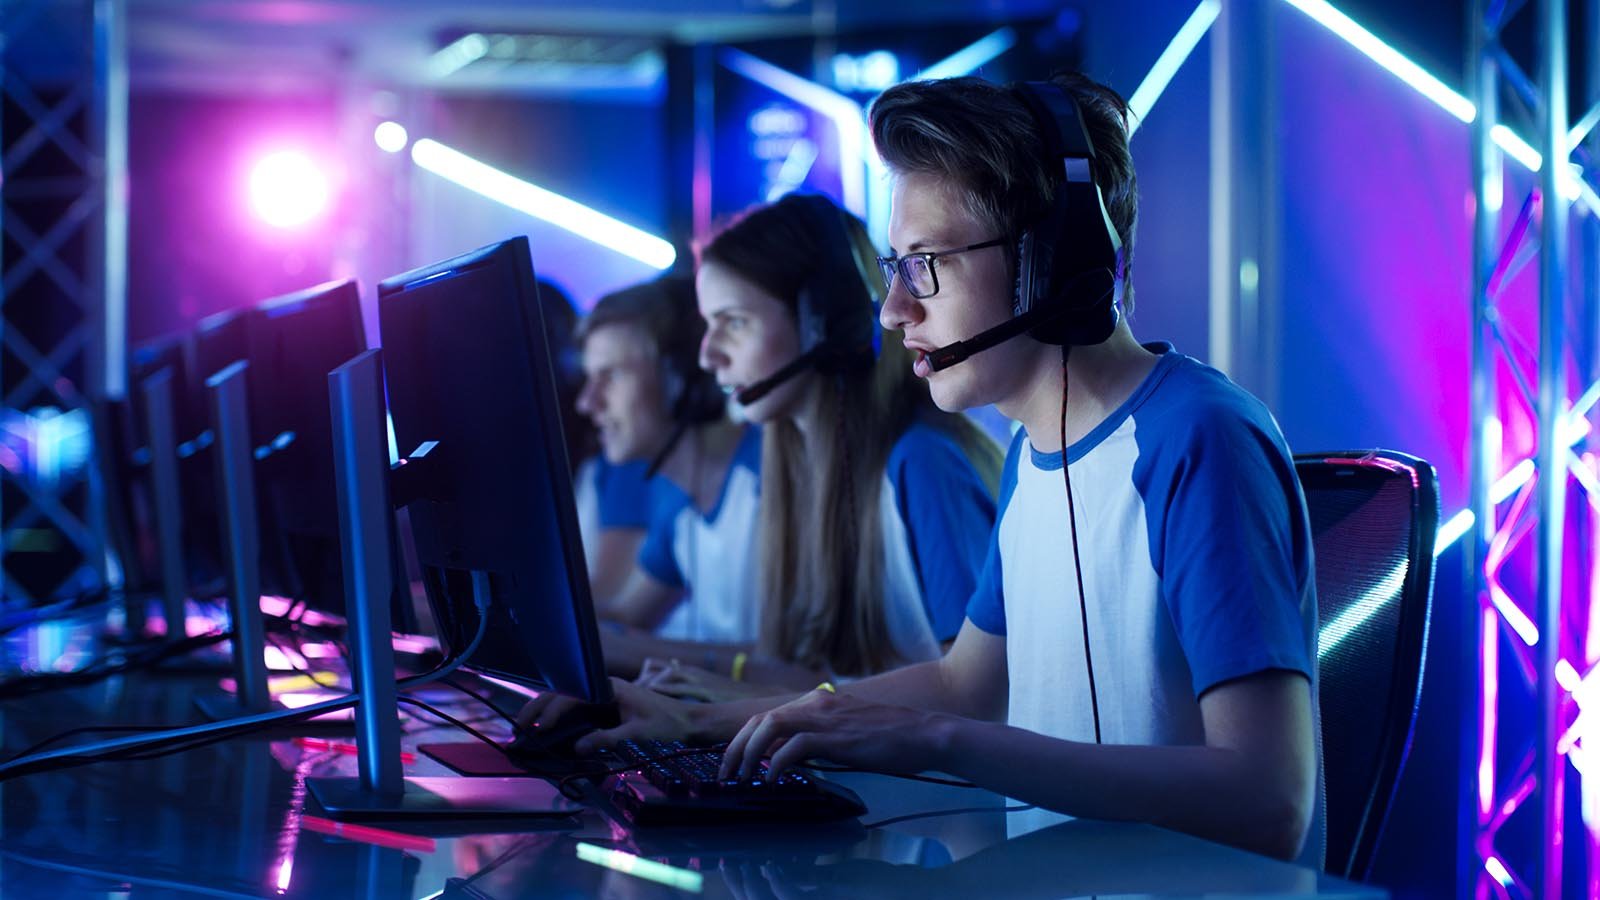 GMBl Stock A row of people wearing matching outfits and headsets play a video game together in a room with blue lighting.